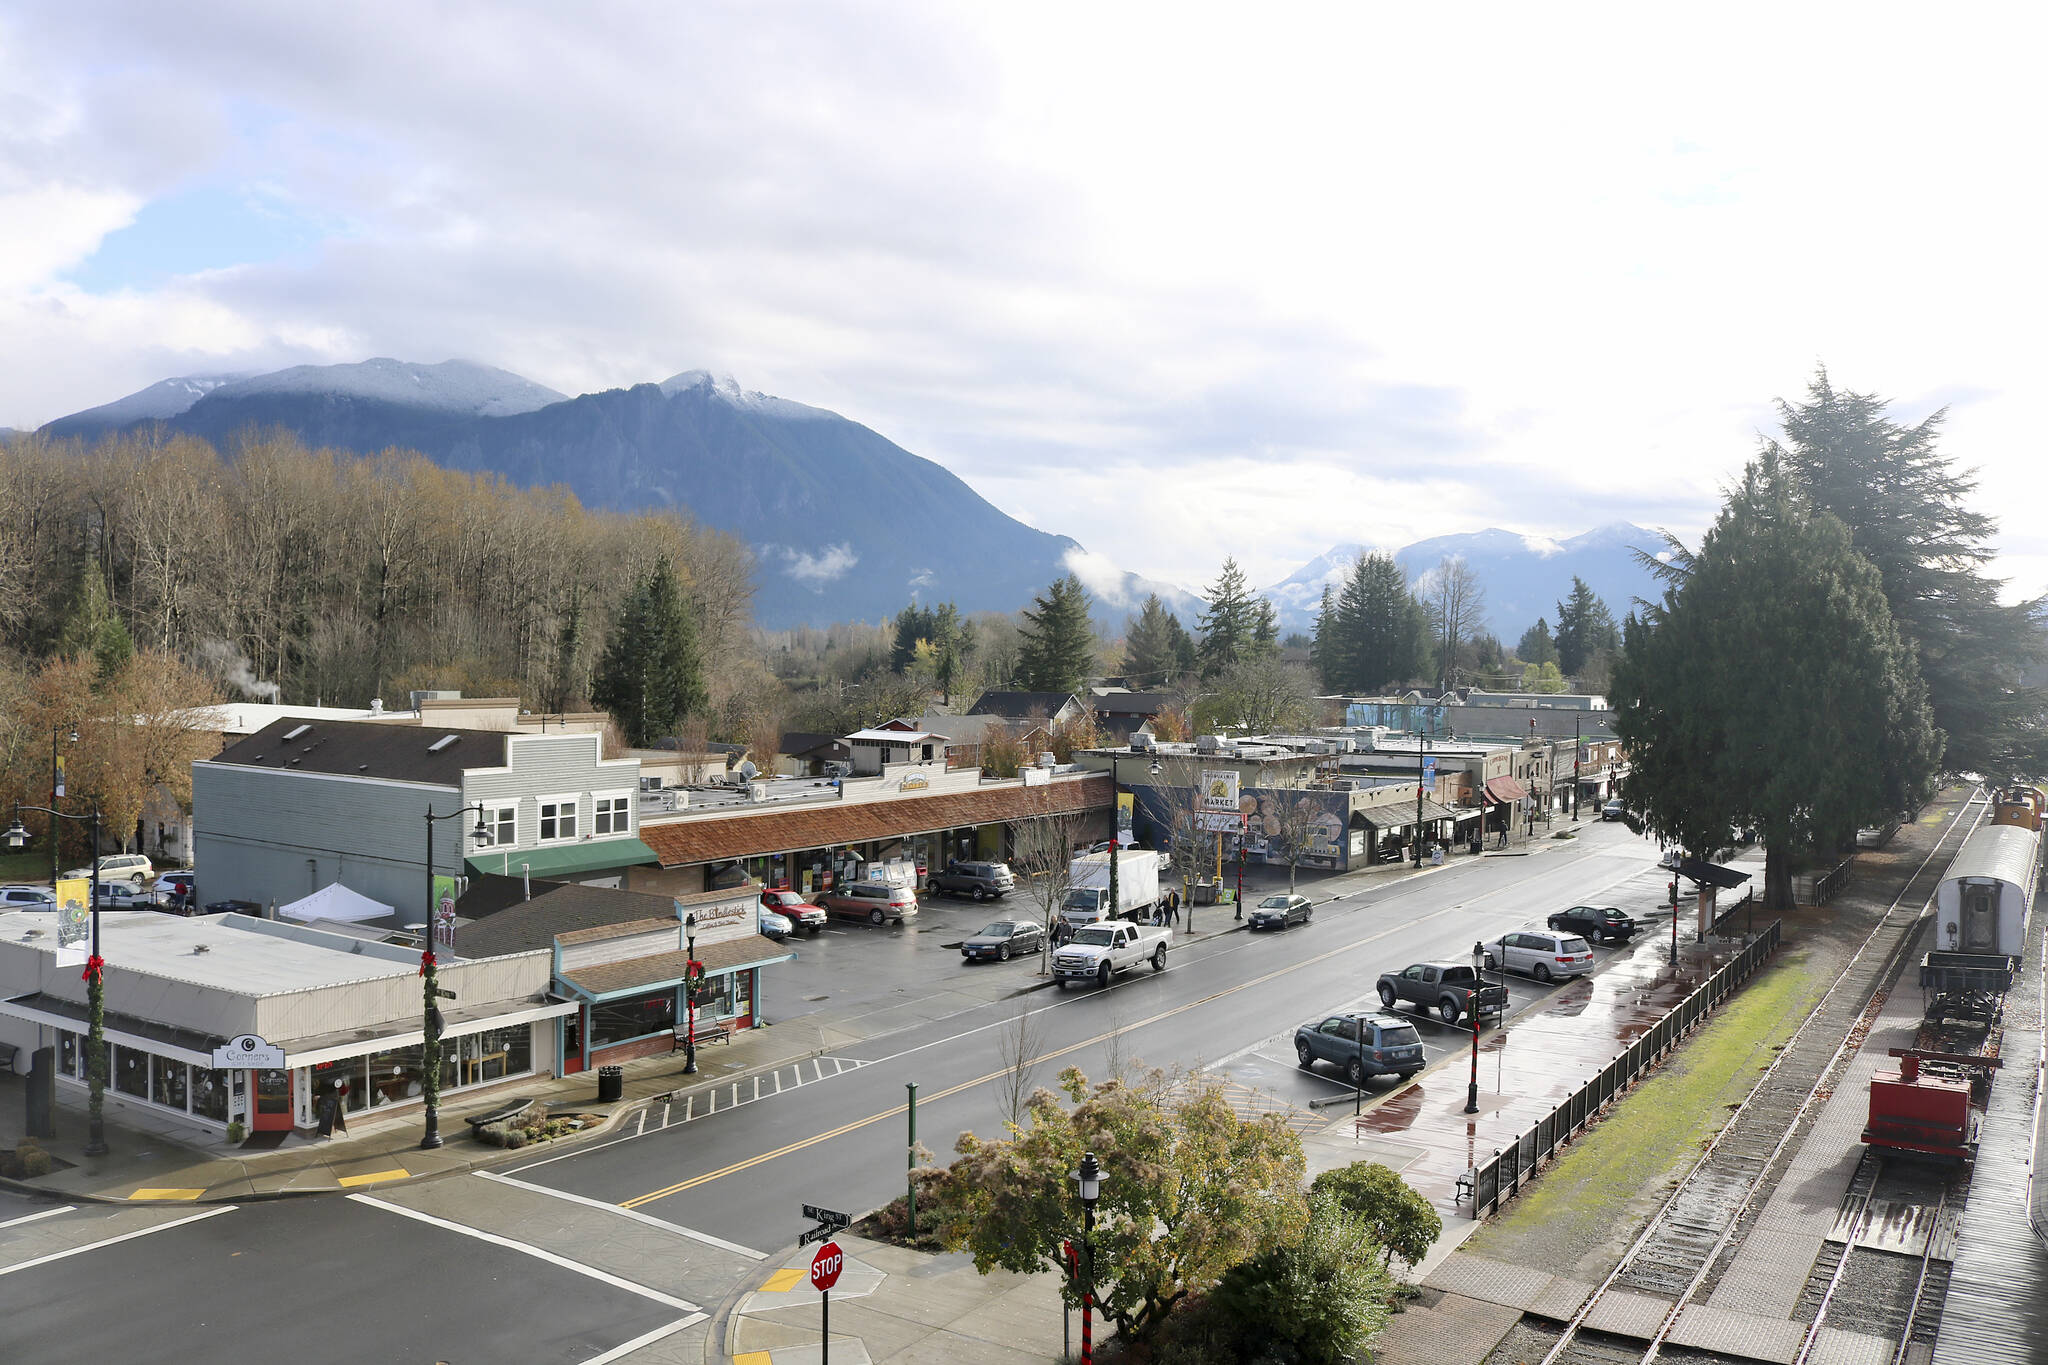 The photo from above Railroad Avenue in the historic downtown district of Snoqualmie was taken in November 2016. File photo